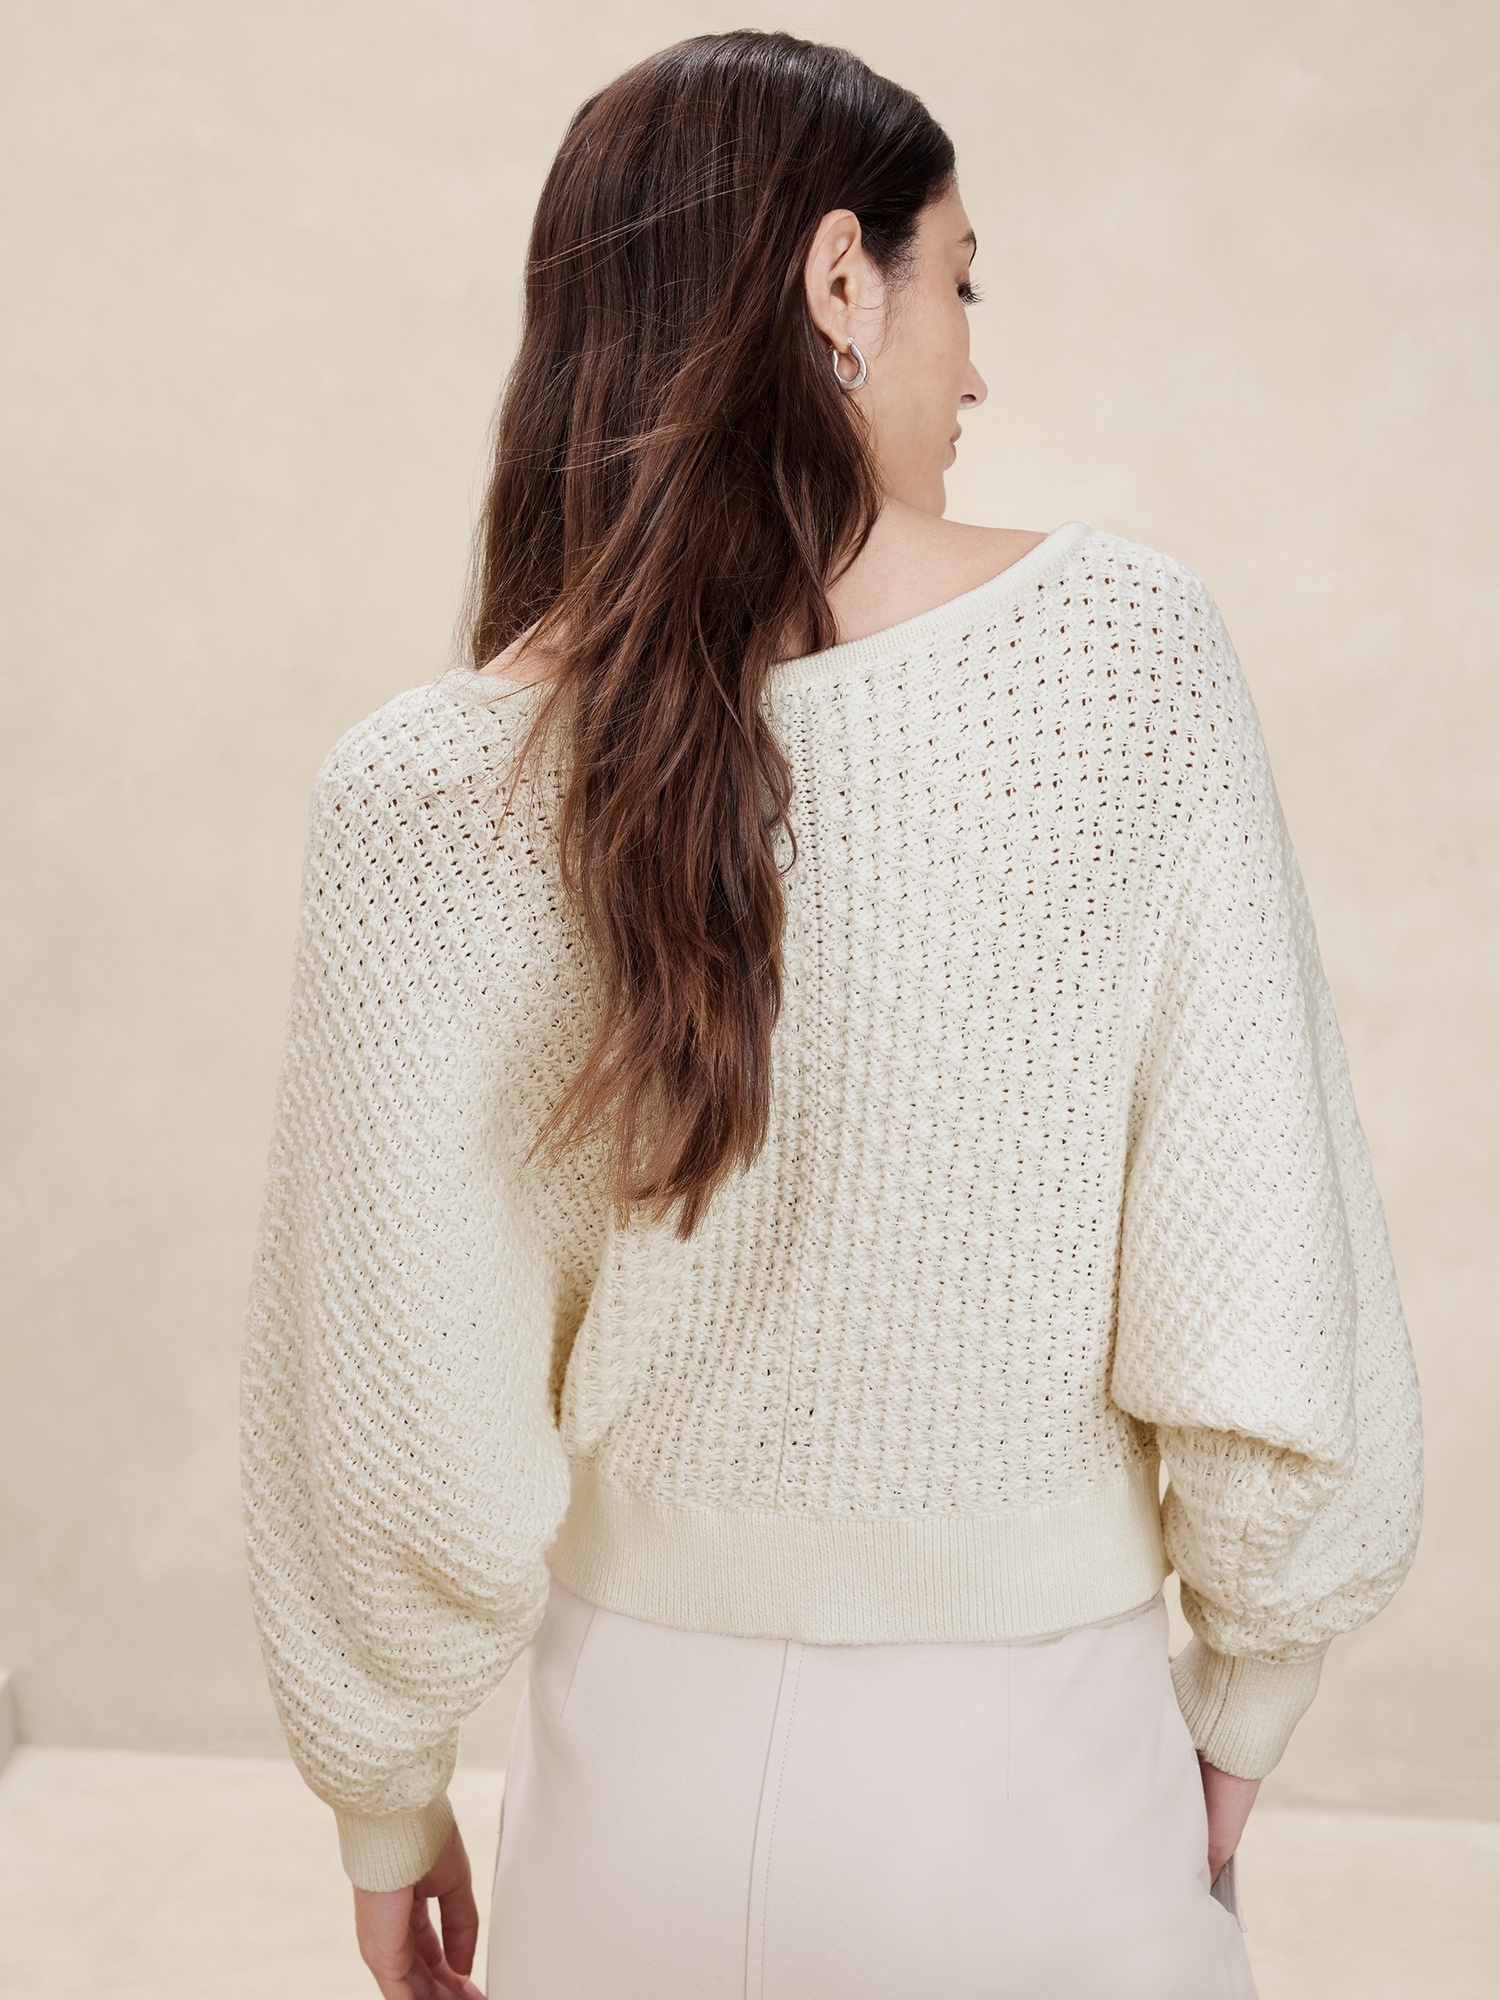 Meredith Cotton Boat-Neck Sweater